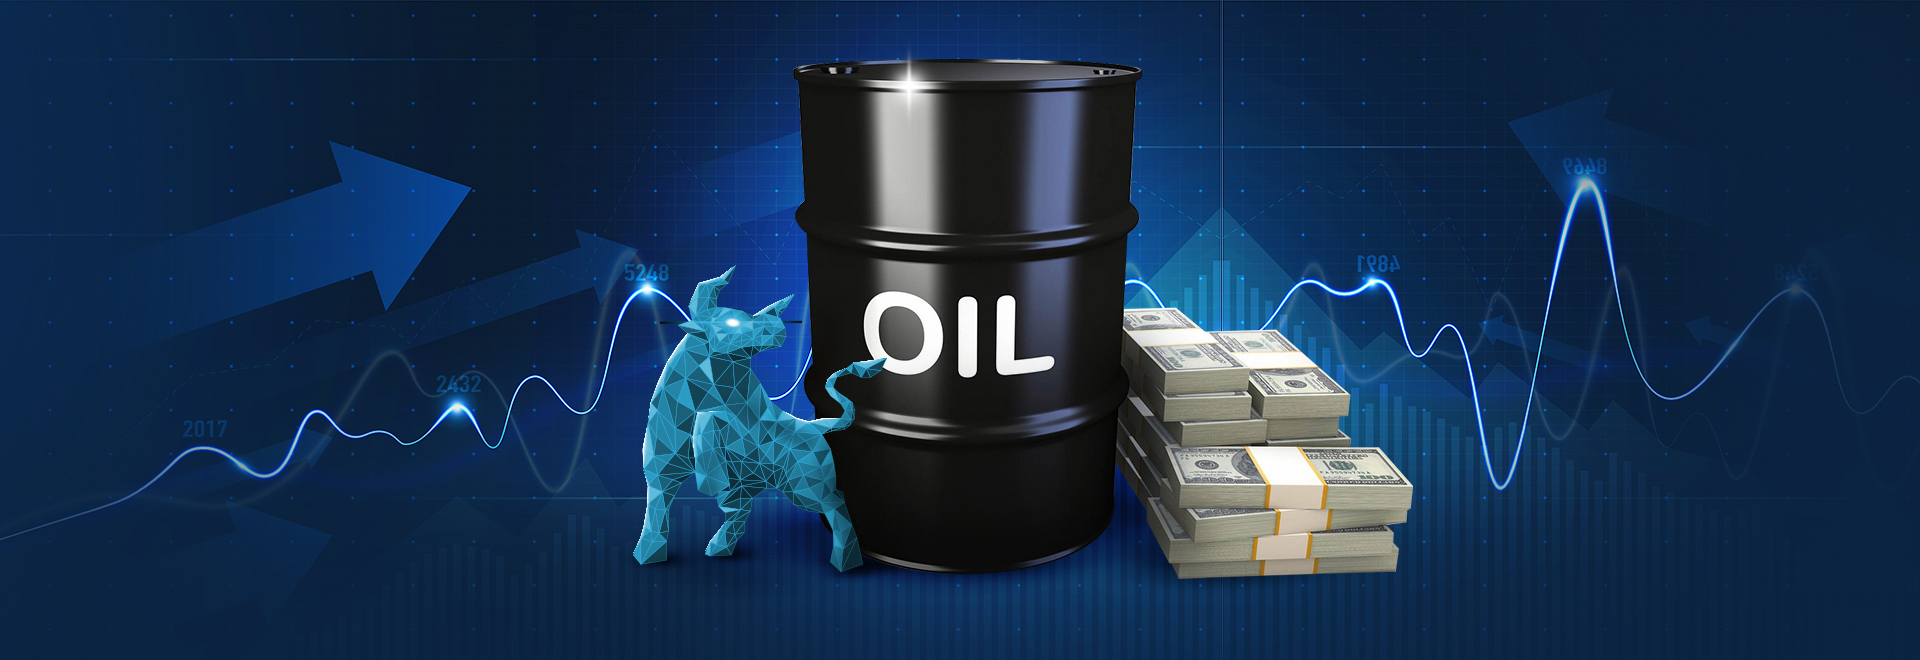 Broader Macroeconomic Implications Of Oil Price Shifts